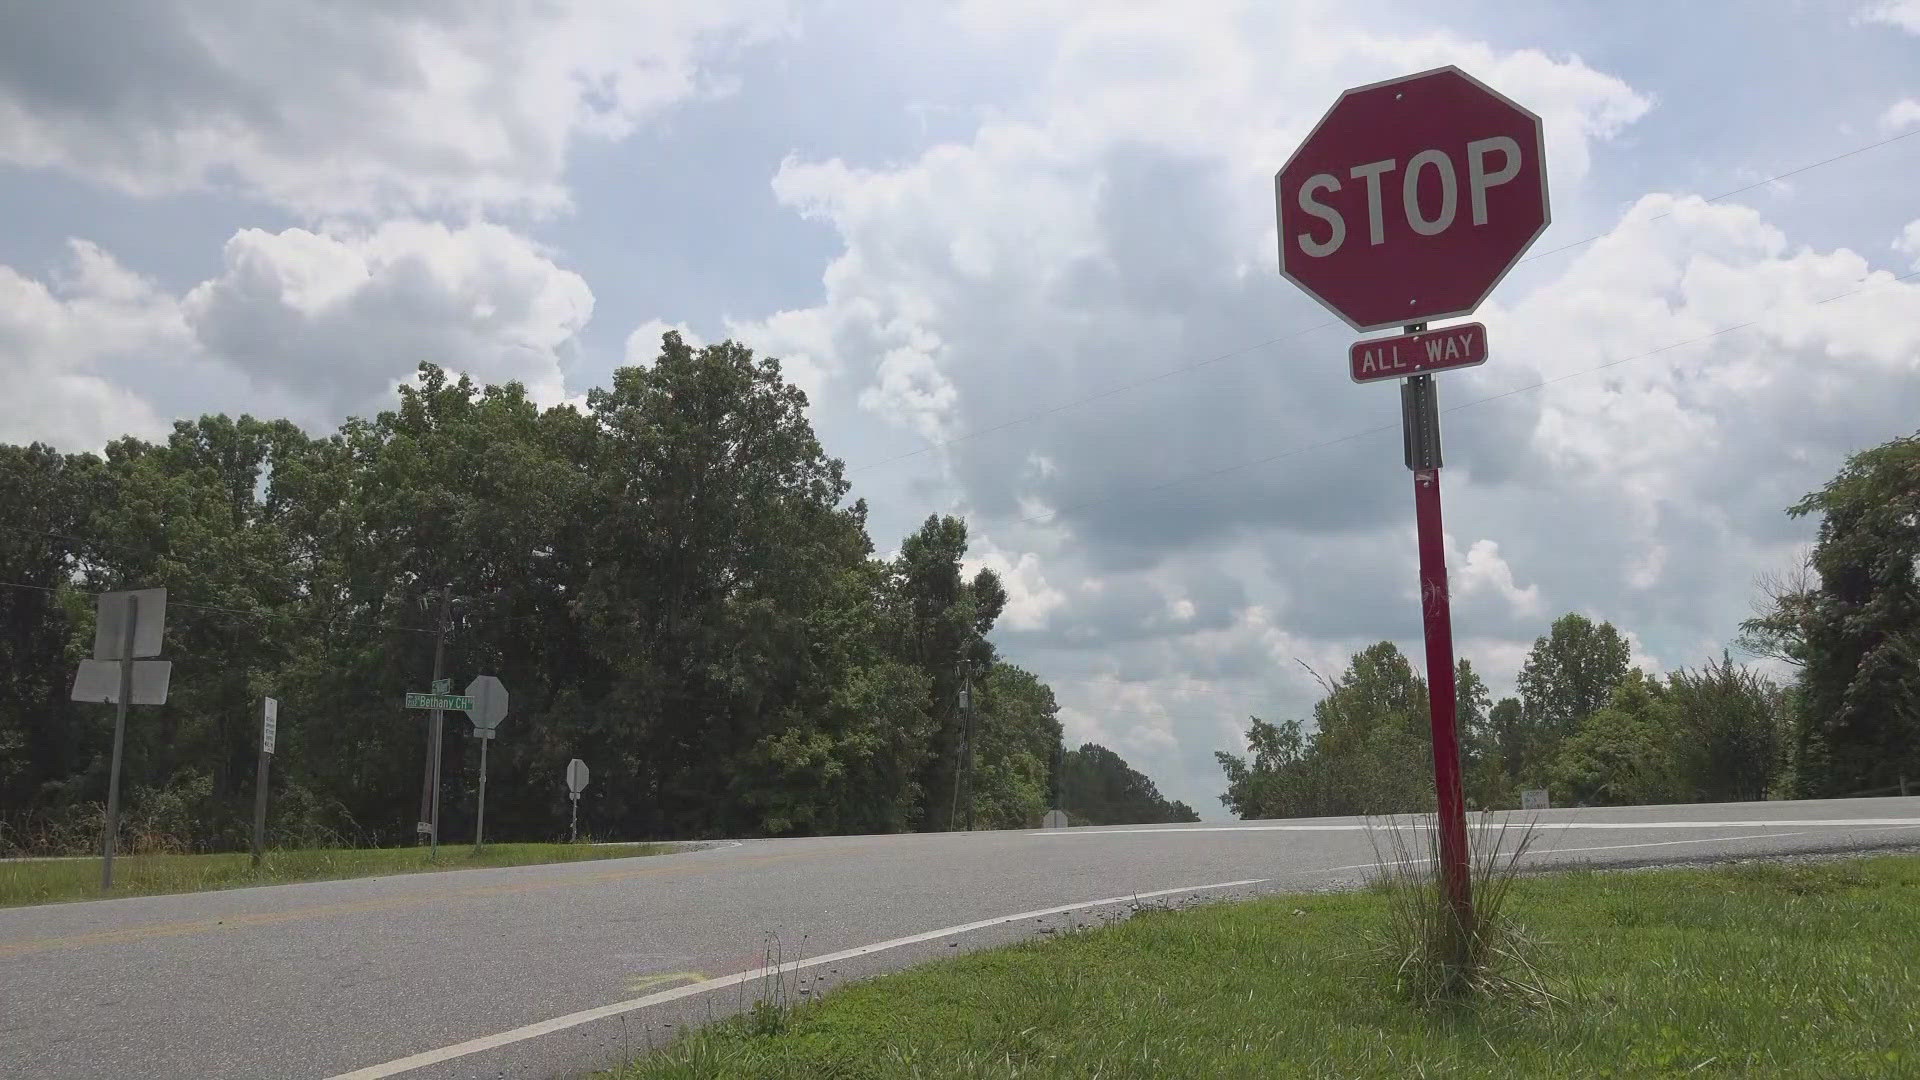 Community calling for changes to Mamie May and Bull Run Creek intersection.